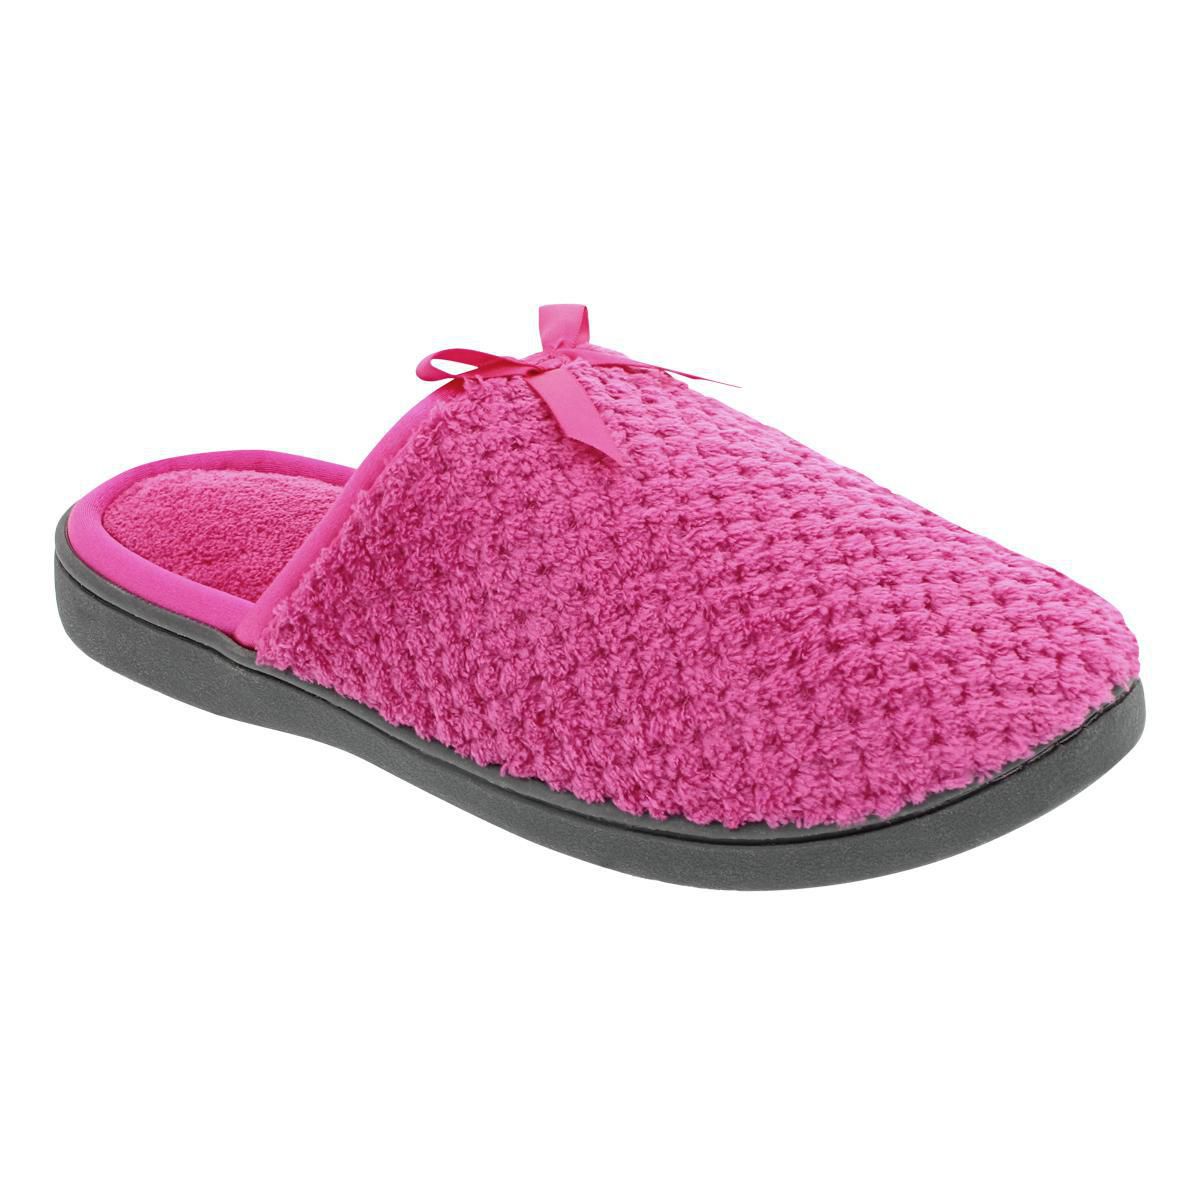 ISOspa by Isotoner® Women's Sara Microterry Clog Slippers | Walmart Canada